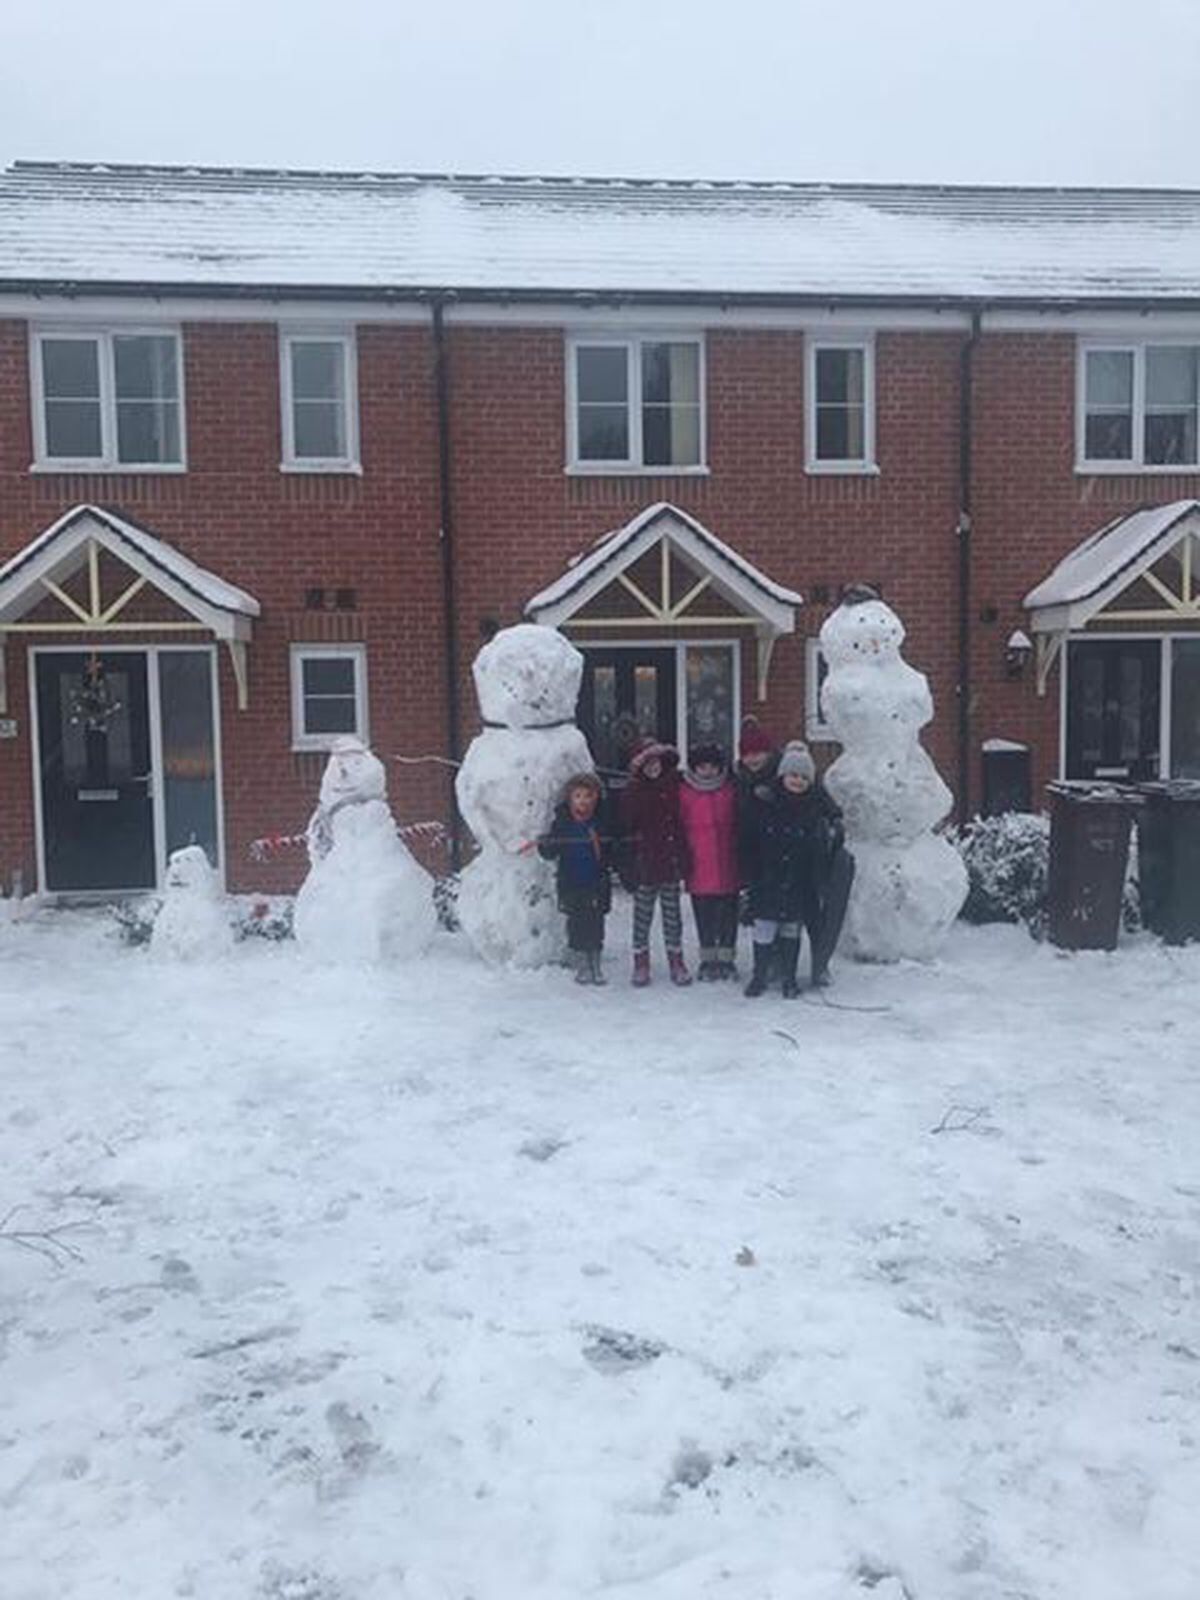 Laura Wiley captured her daughters and their friends creating these huge snowmen in Wednesfield